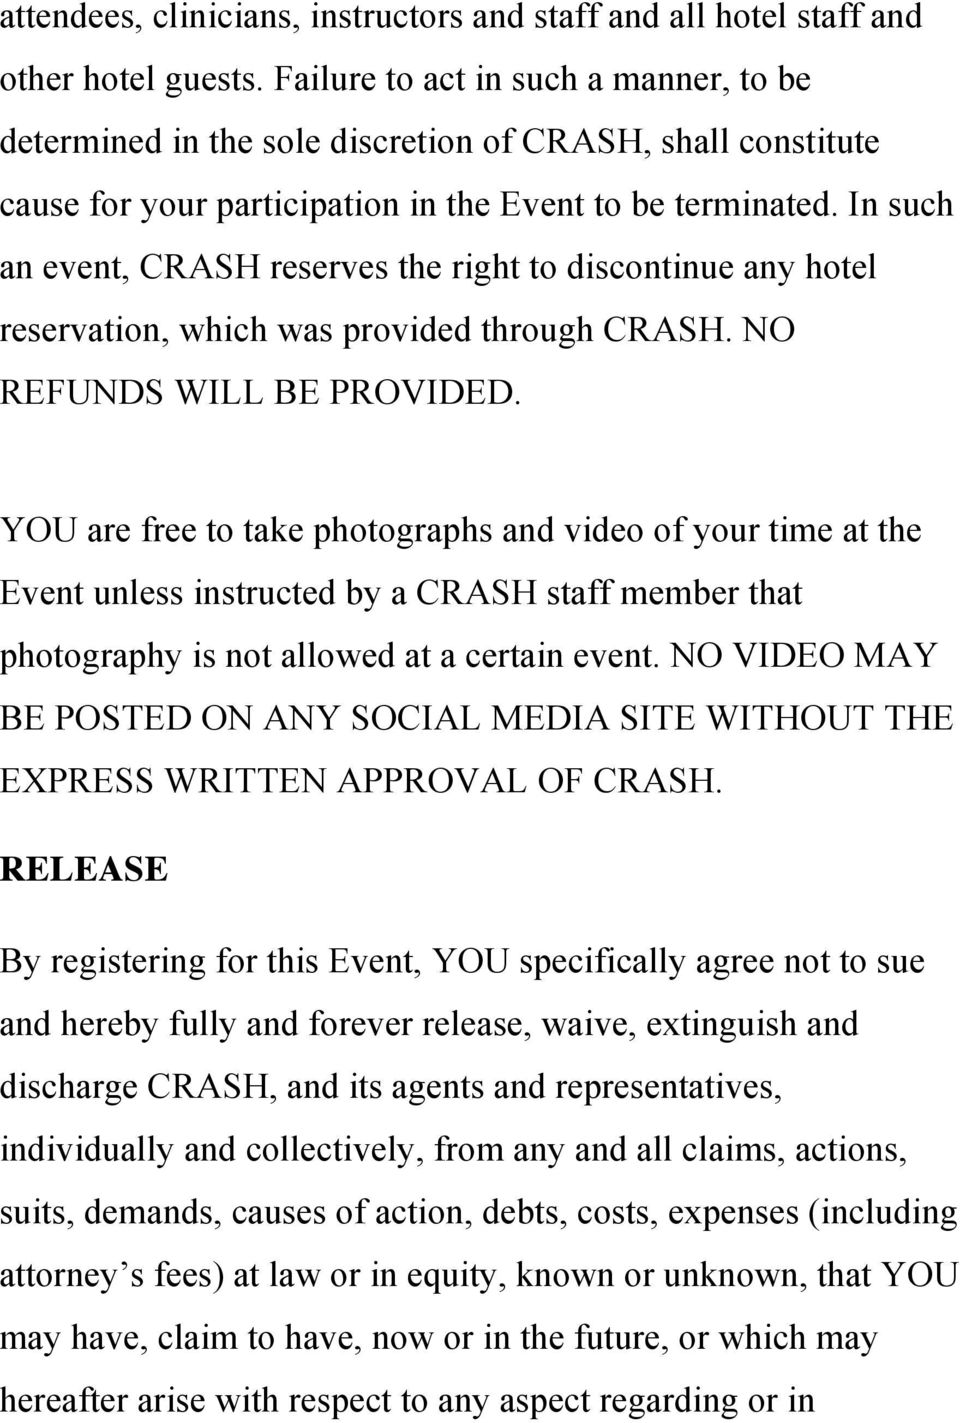 In such an event, CRASH reserves the right to discontinue any hotel reservation, which was provided through CRASH. NO REFUNDS WILL BE PROVIDED.